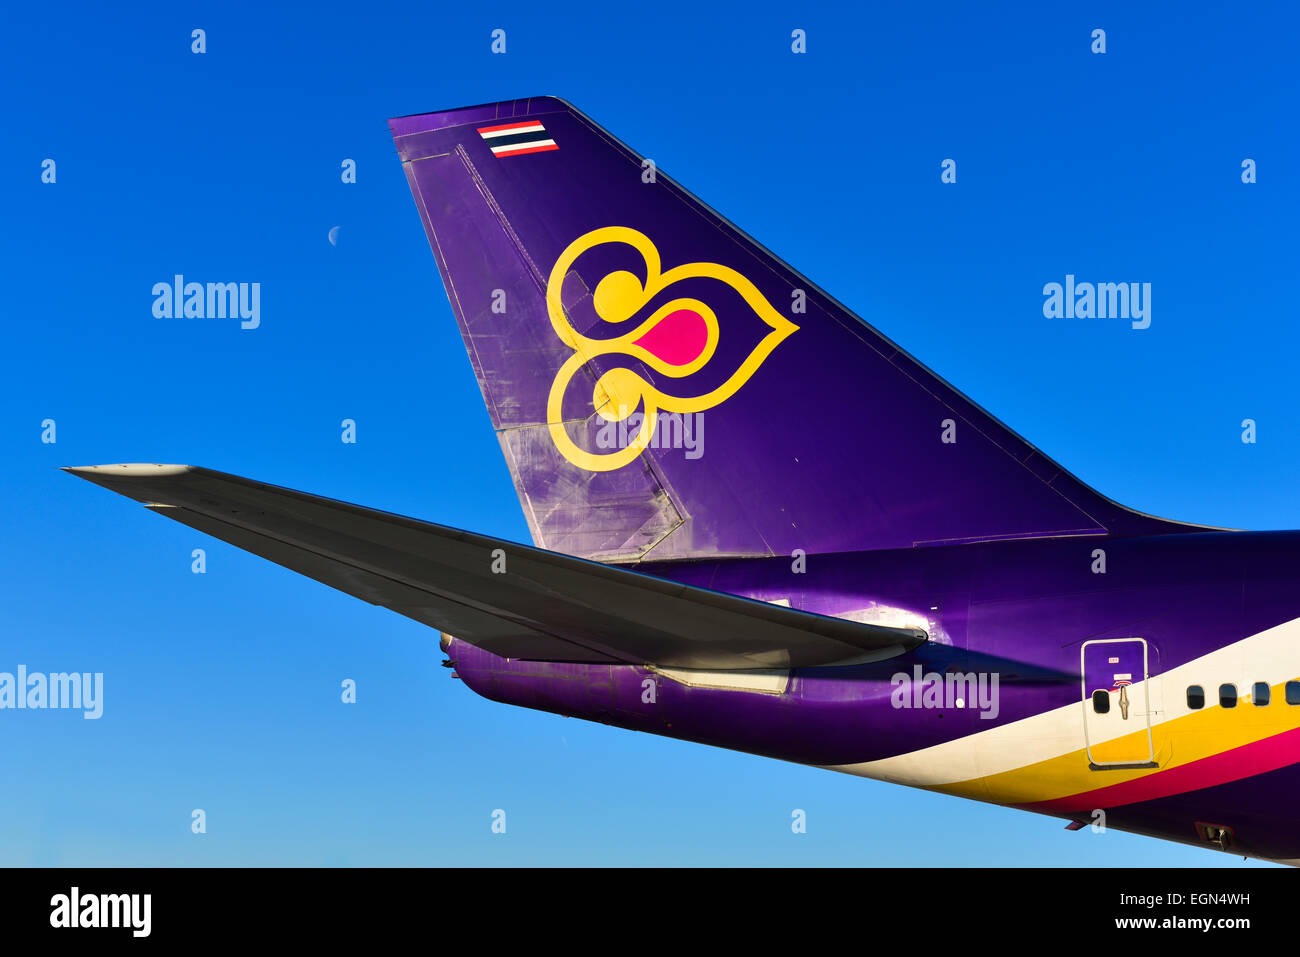 thai airways, airbus, A 340, aircraft, airplane, plane, wing, winglet, horizontal stabilizer, Stock Photo